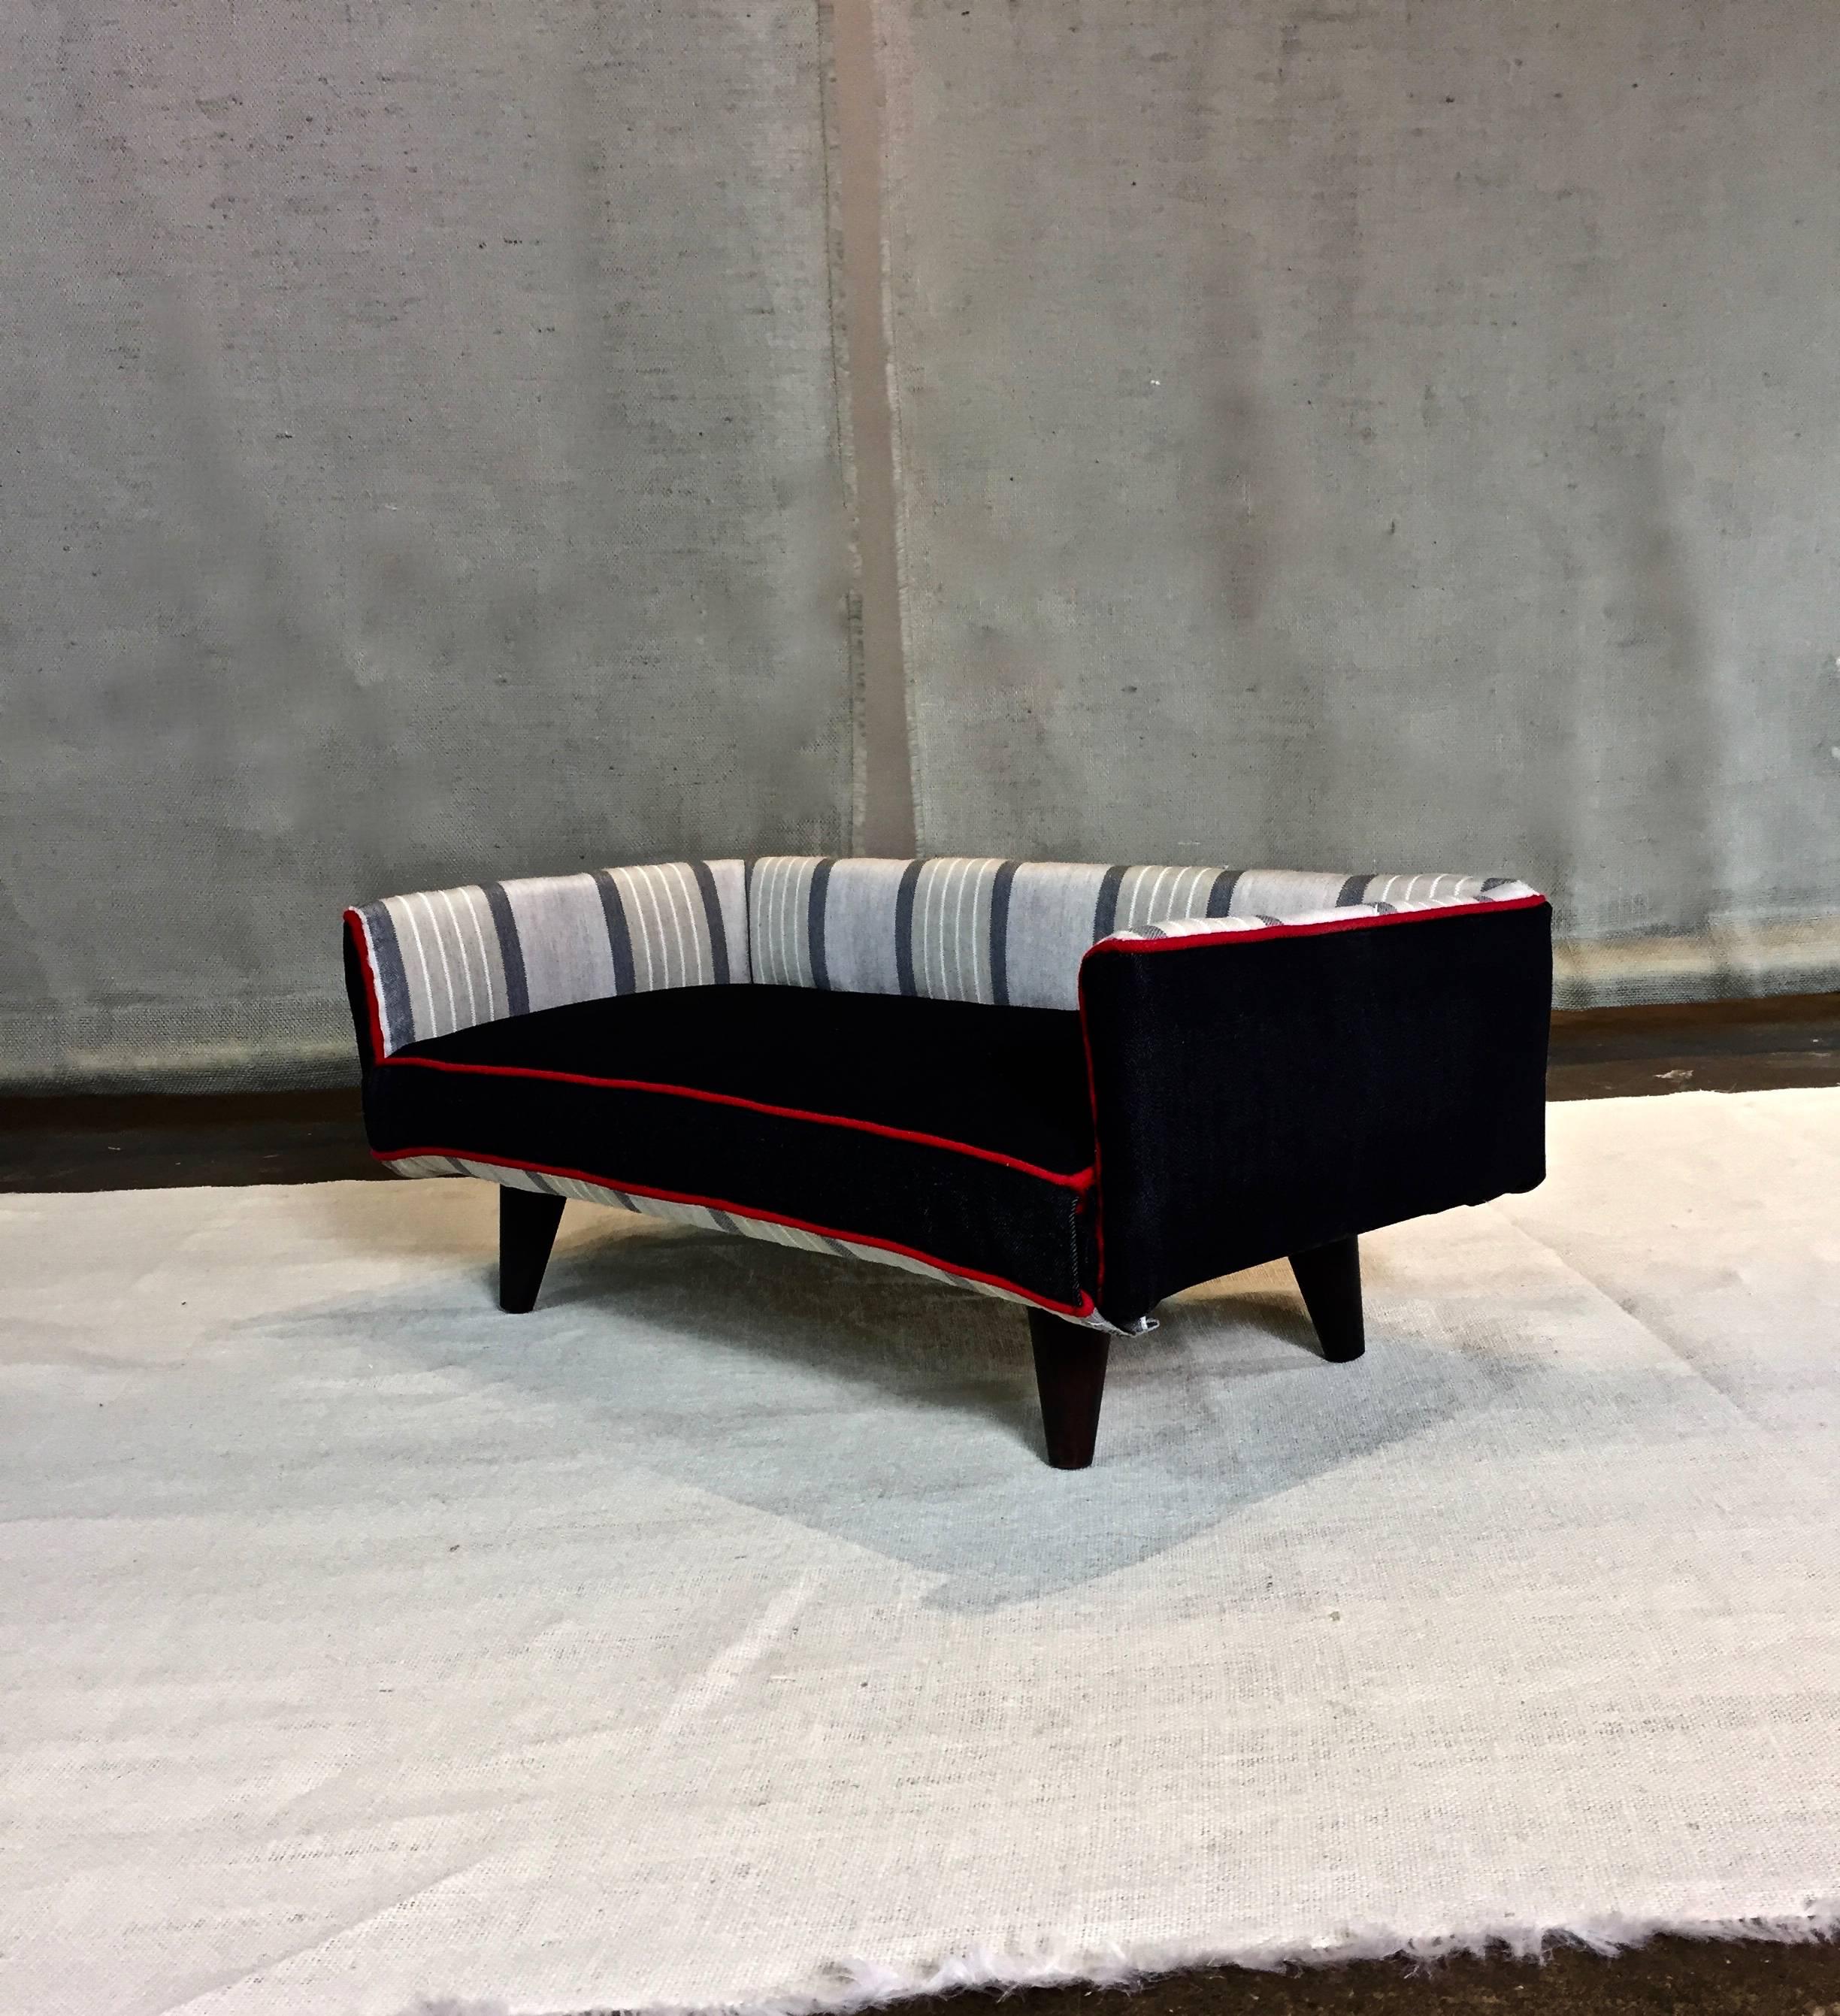 Contemporary Black Denim and Stripe Midcentury Dogbed For Sale